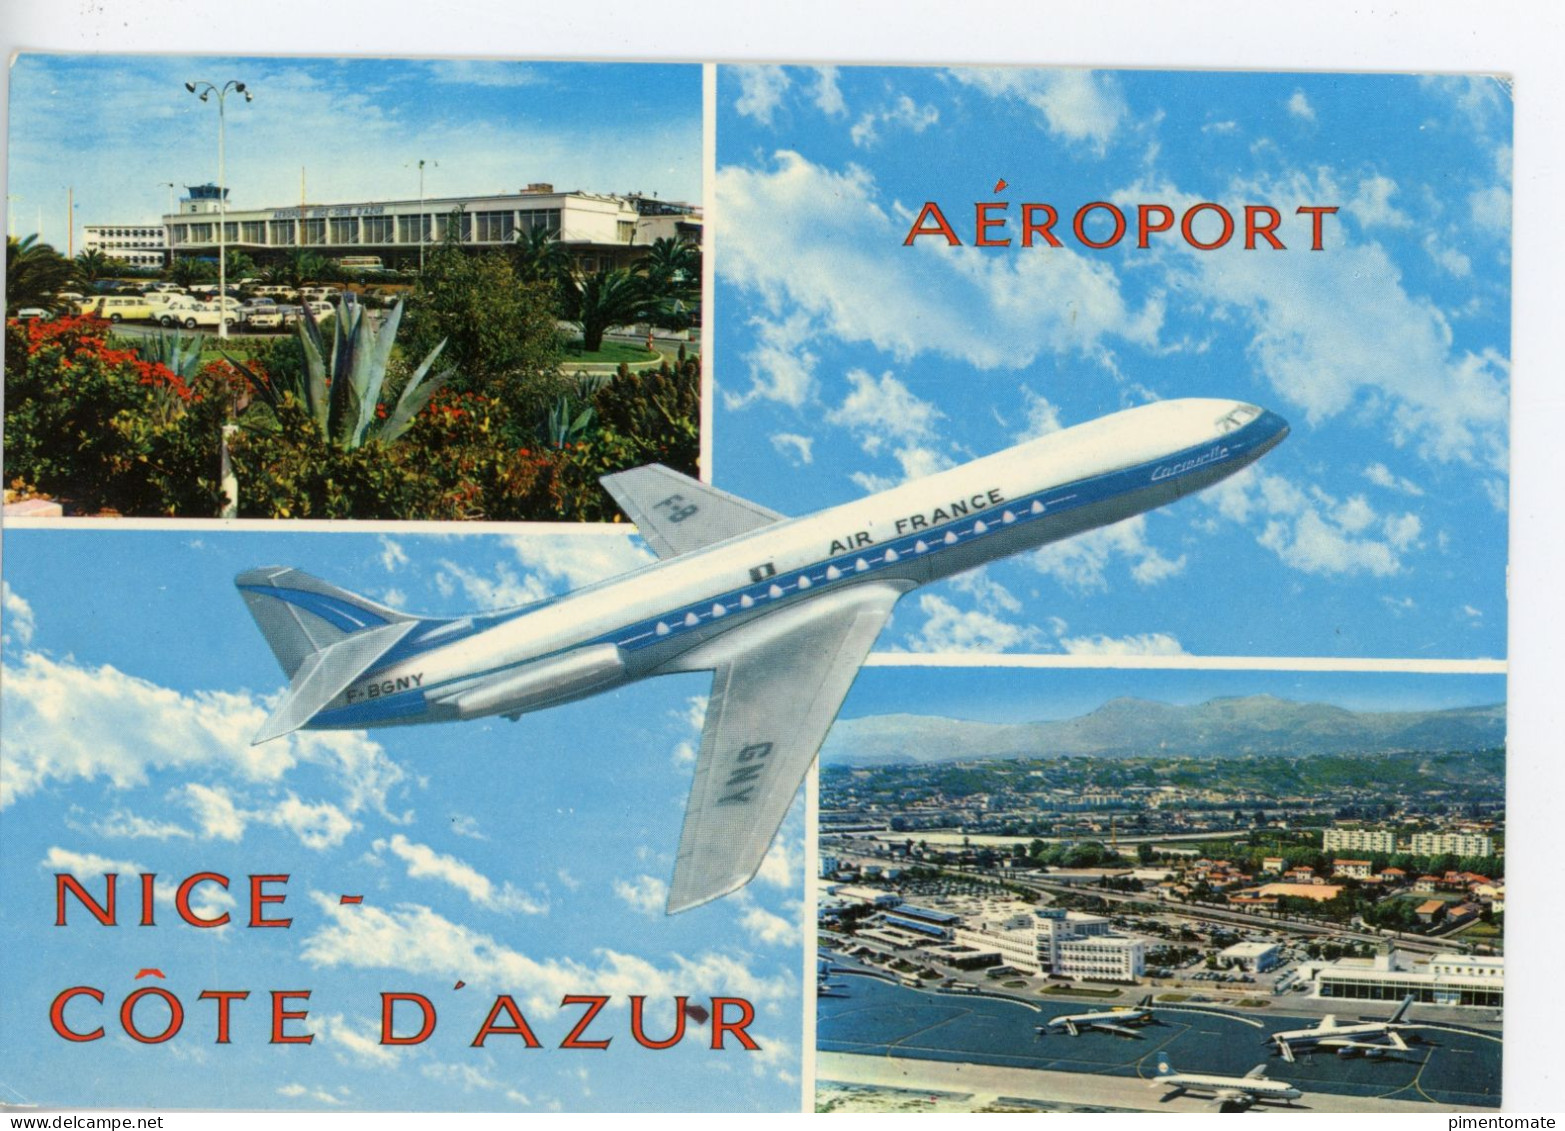 NICE AEROPORT NICE COTE D'AZUR CARAVELLE AIR FRANCE - Luchtvaart - Luchthaven